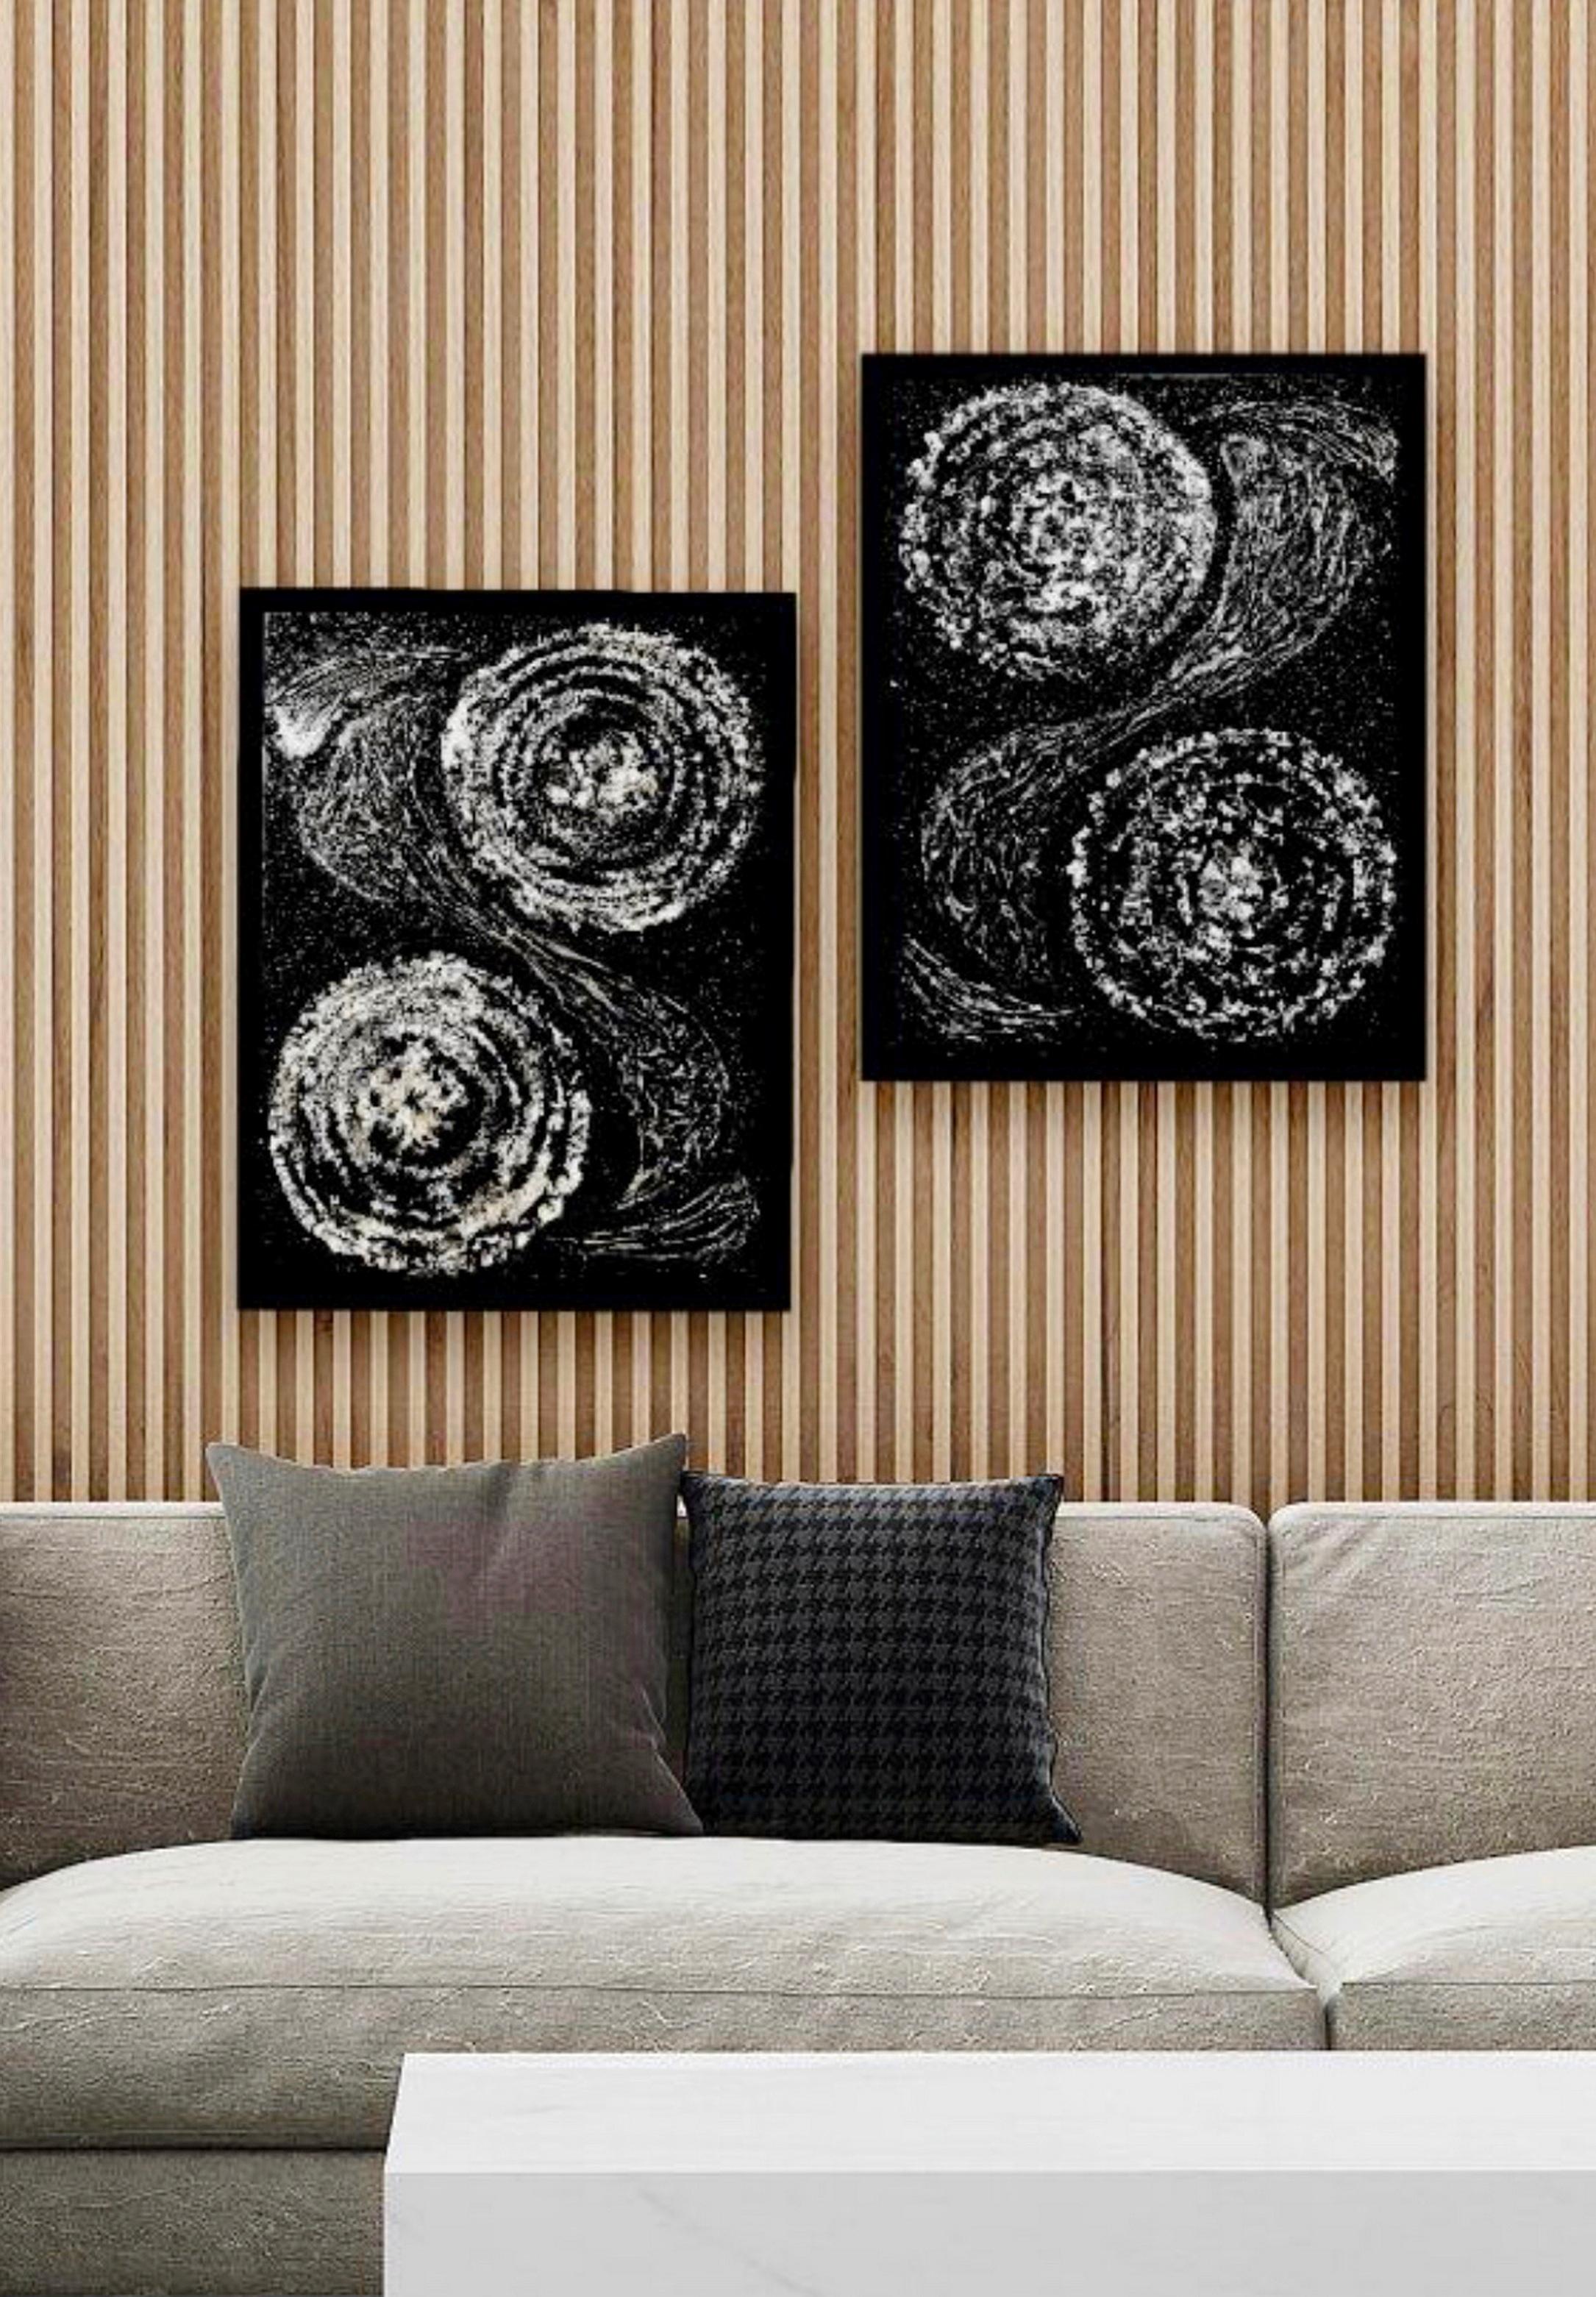 Set of 2 Wall Sculpture. Diptych. Collage Mixed Media on canvas, black & white.